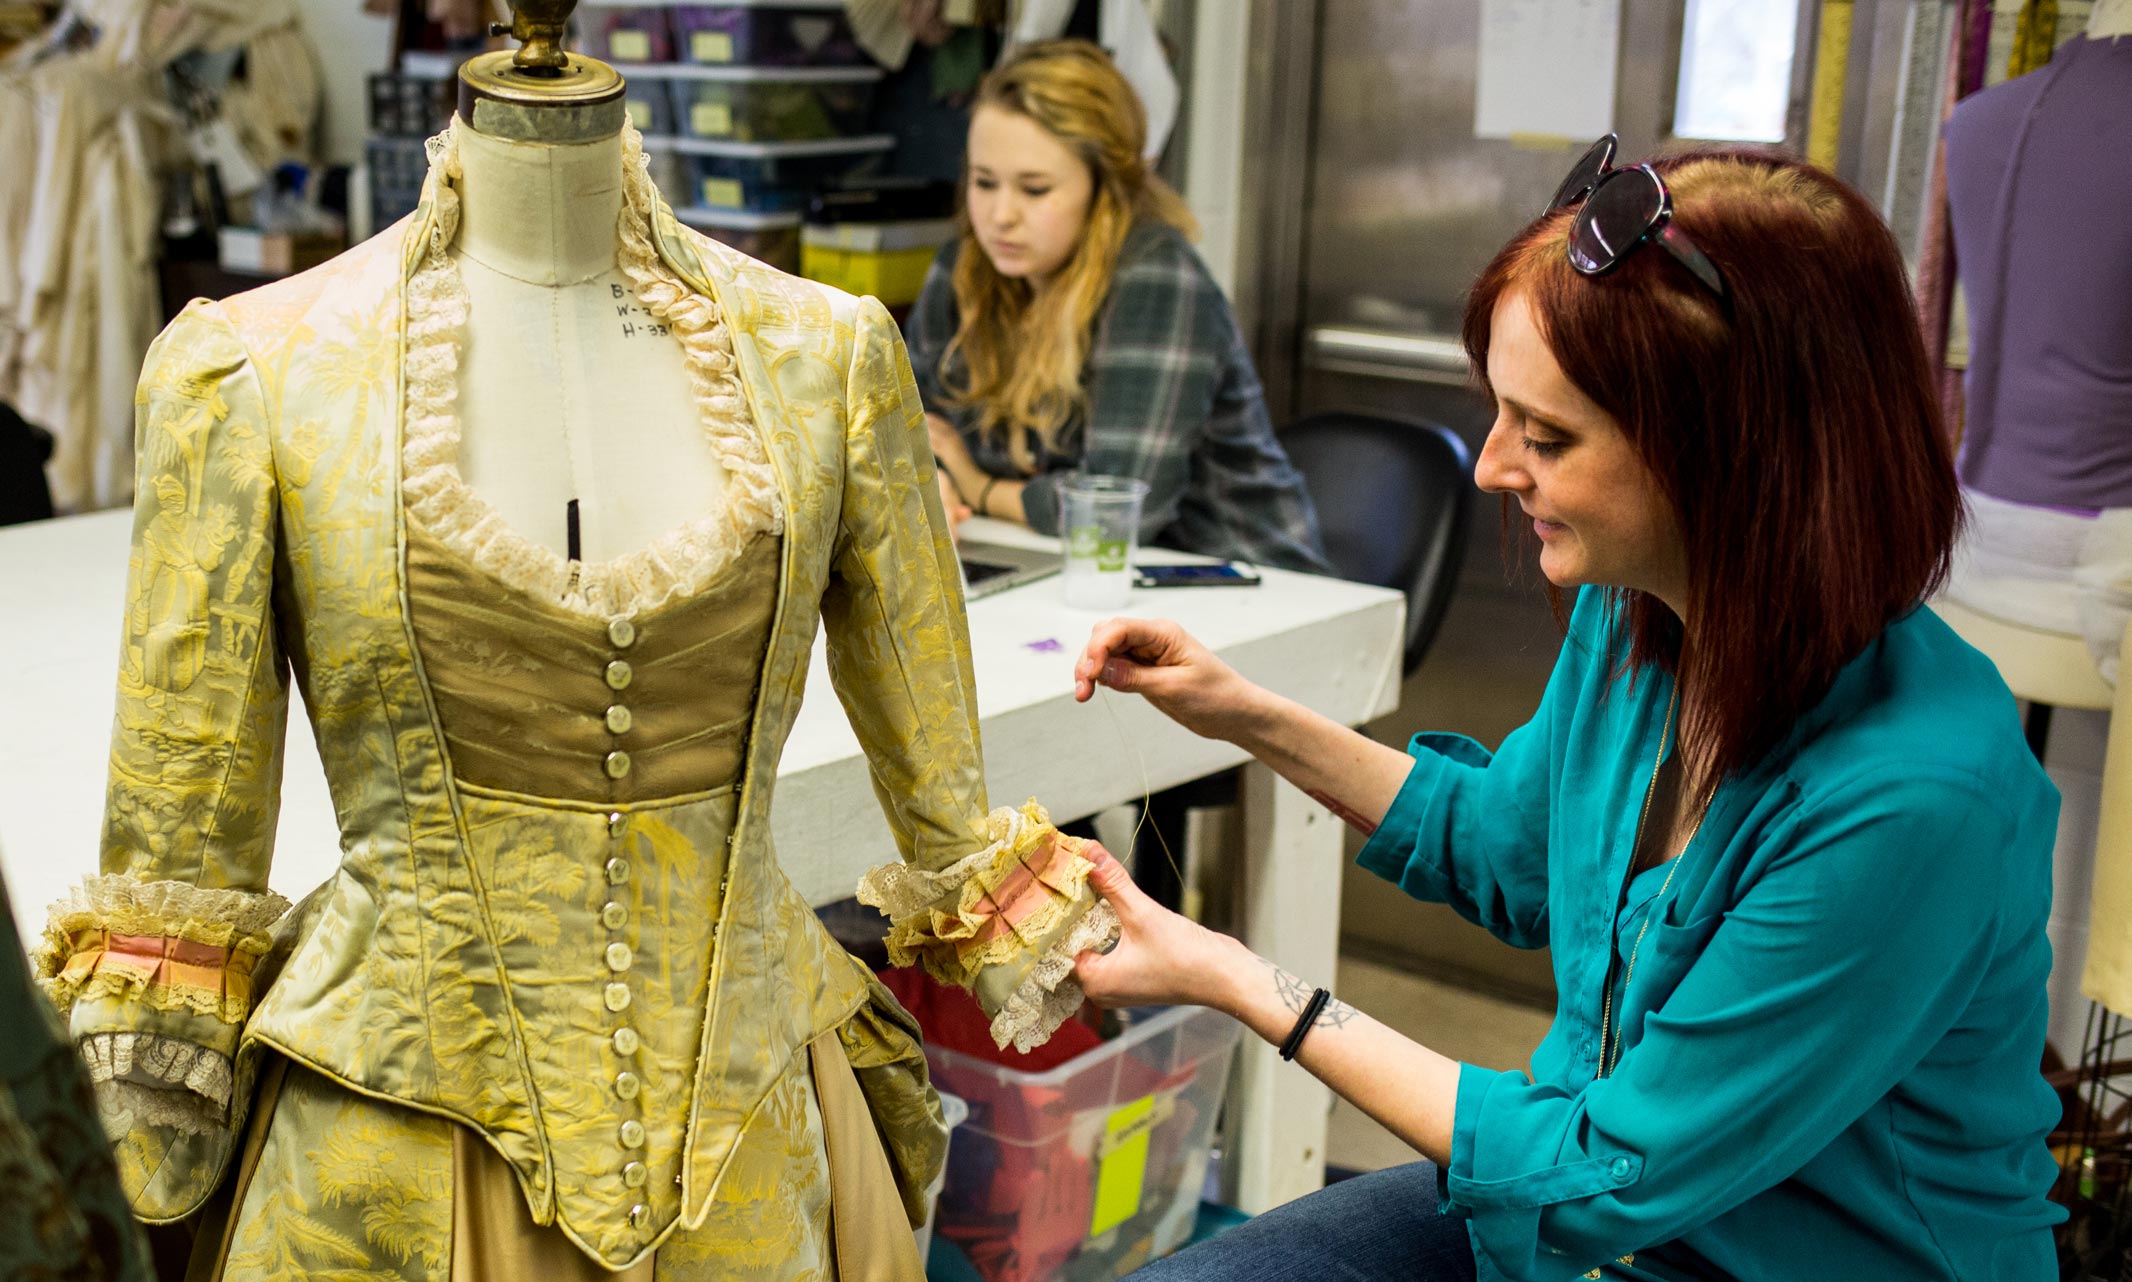  Graduate student L.A. Clevenson works on the finishing details of a dress.